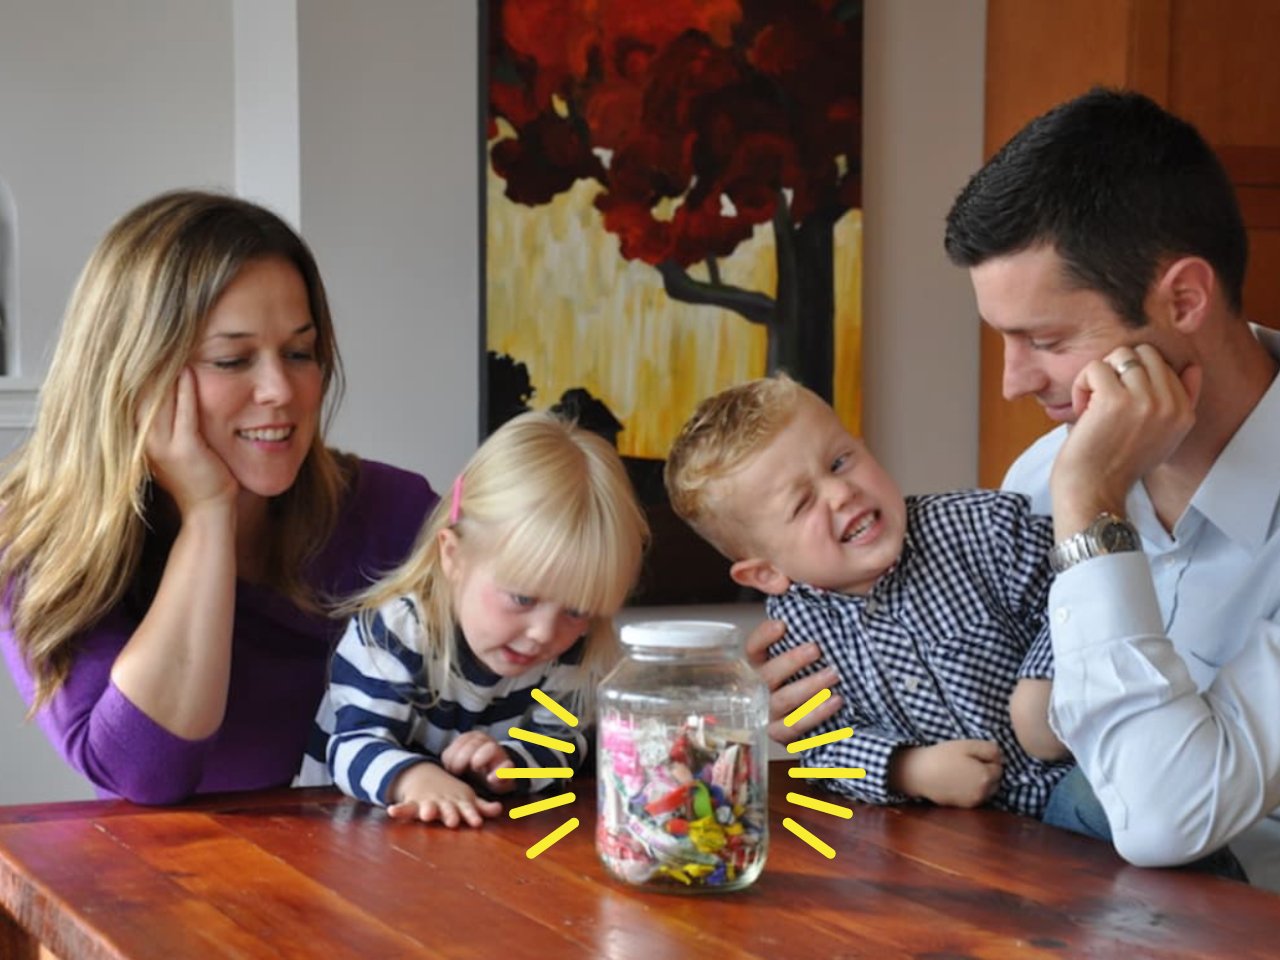 mom, dad and two kids at a table looking at a jar of garbage